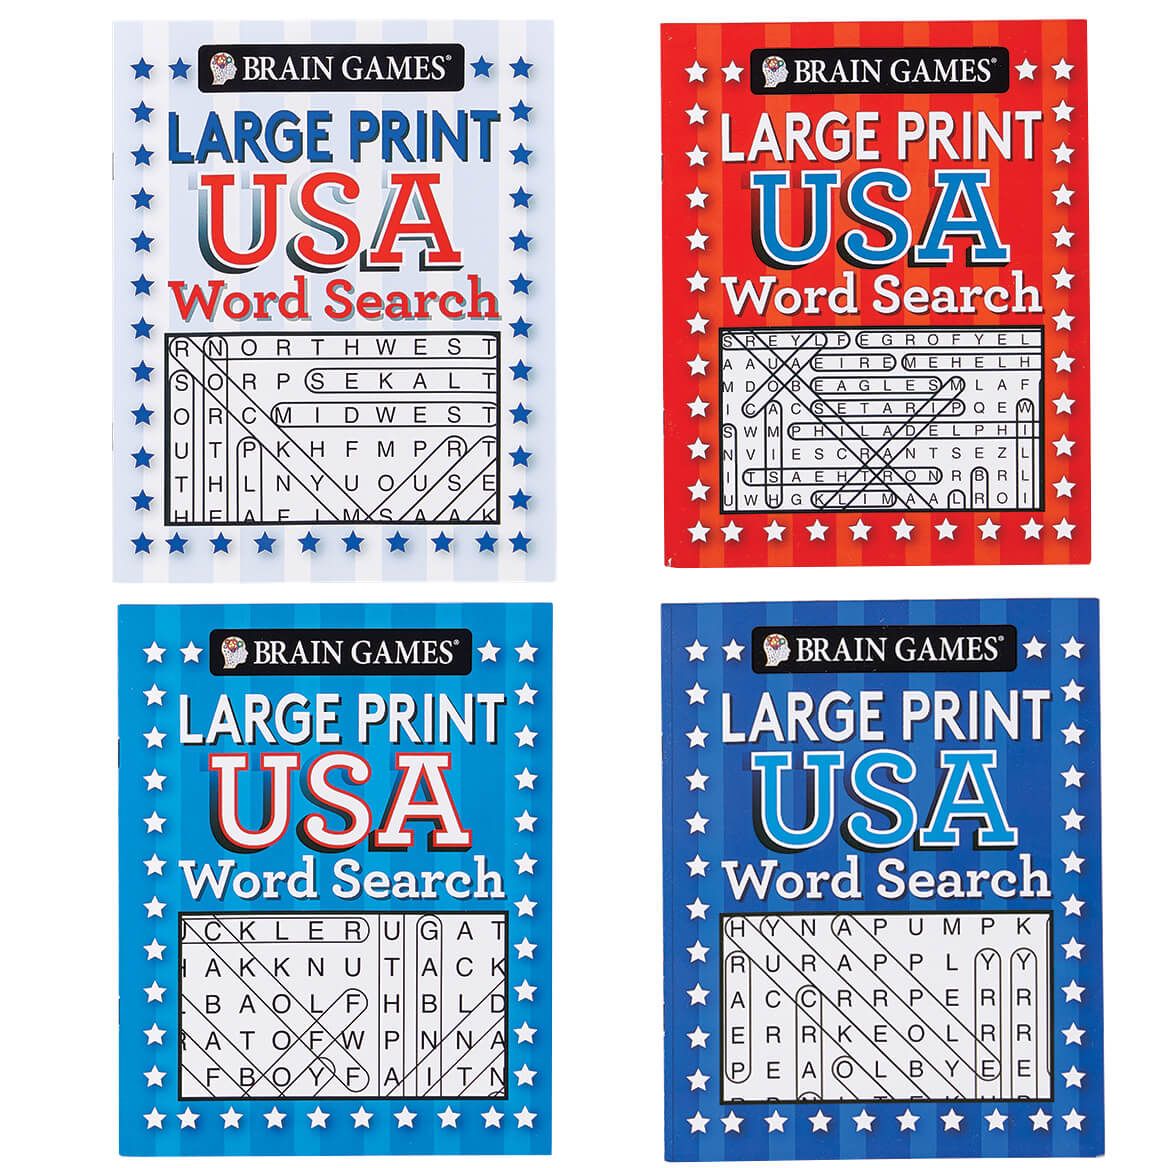 Brain Games® Large Print USA Word Search Books, Set of 4 + '-' + 372671